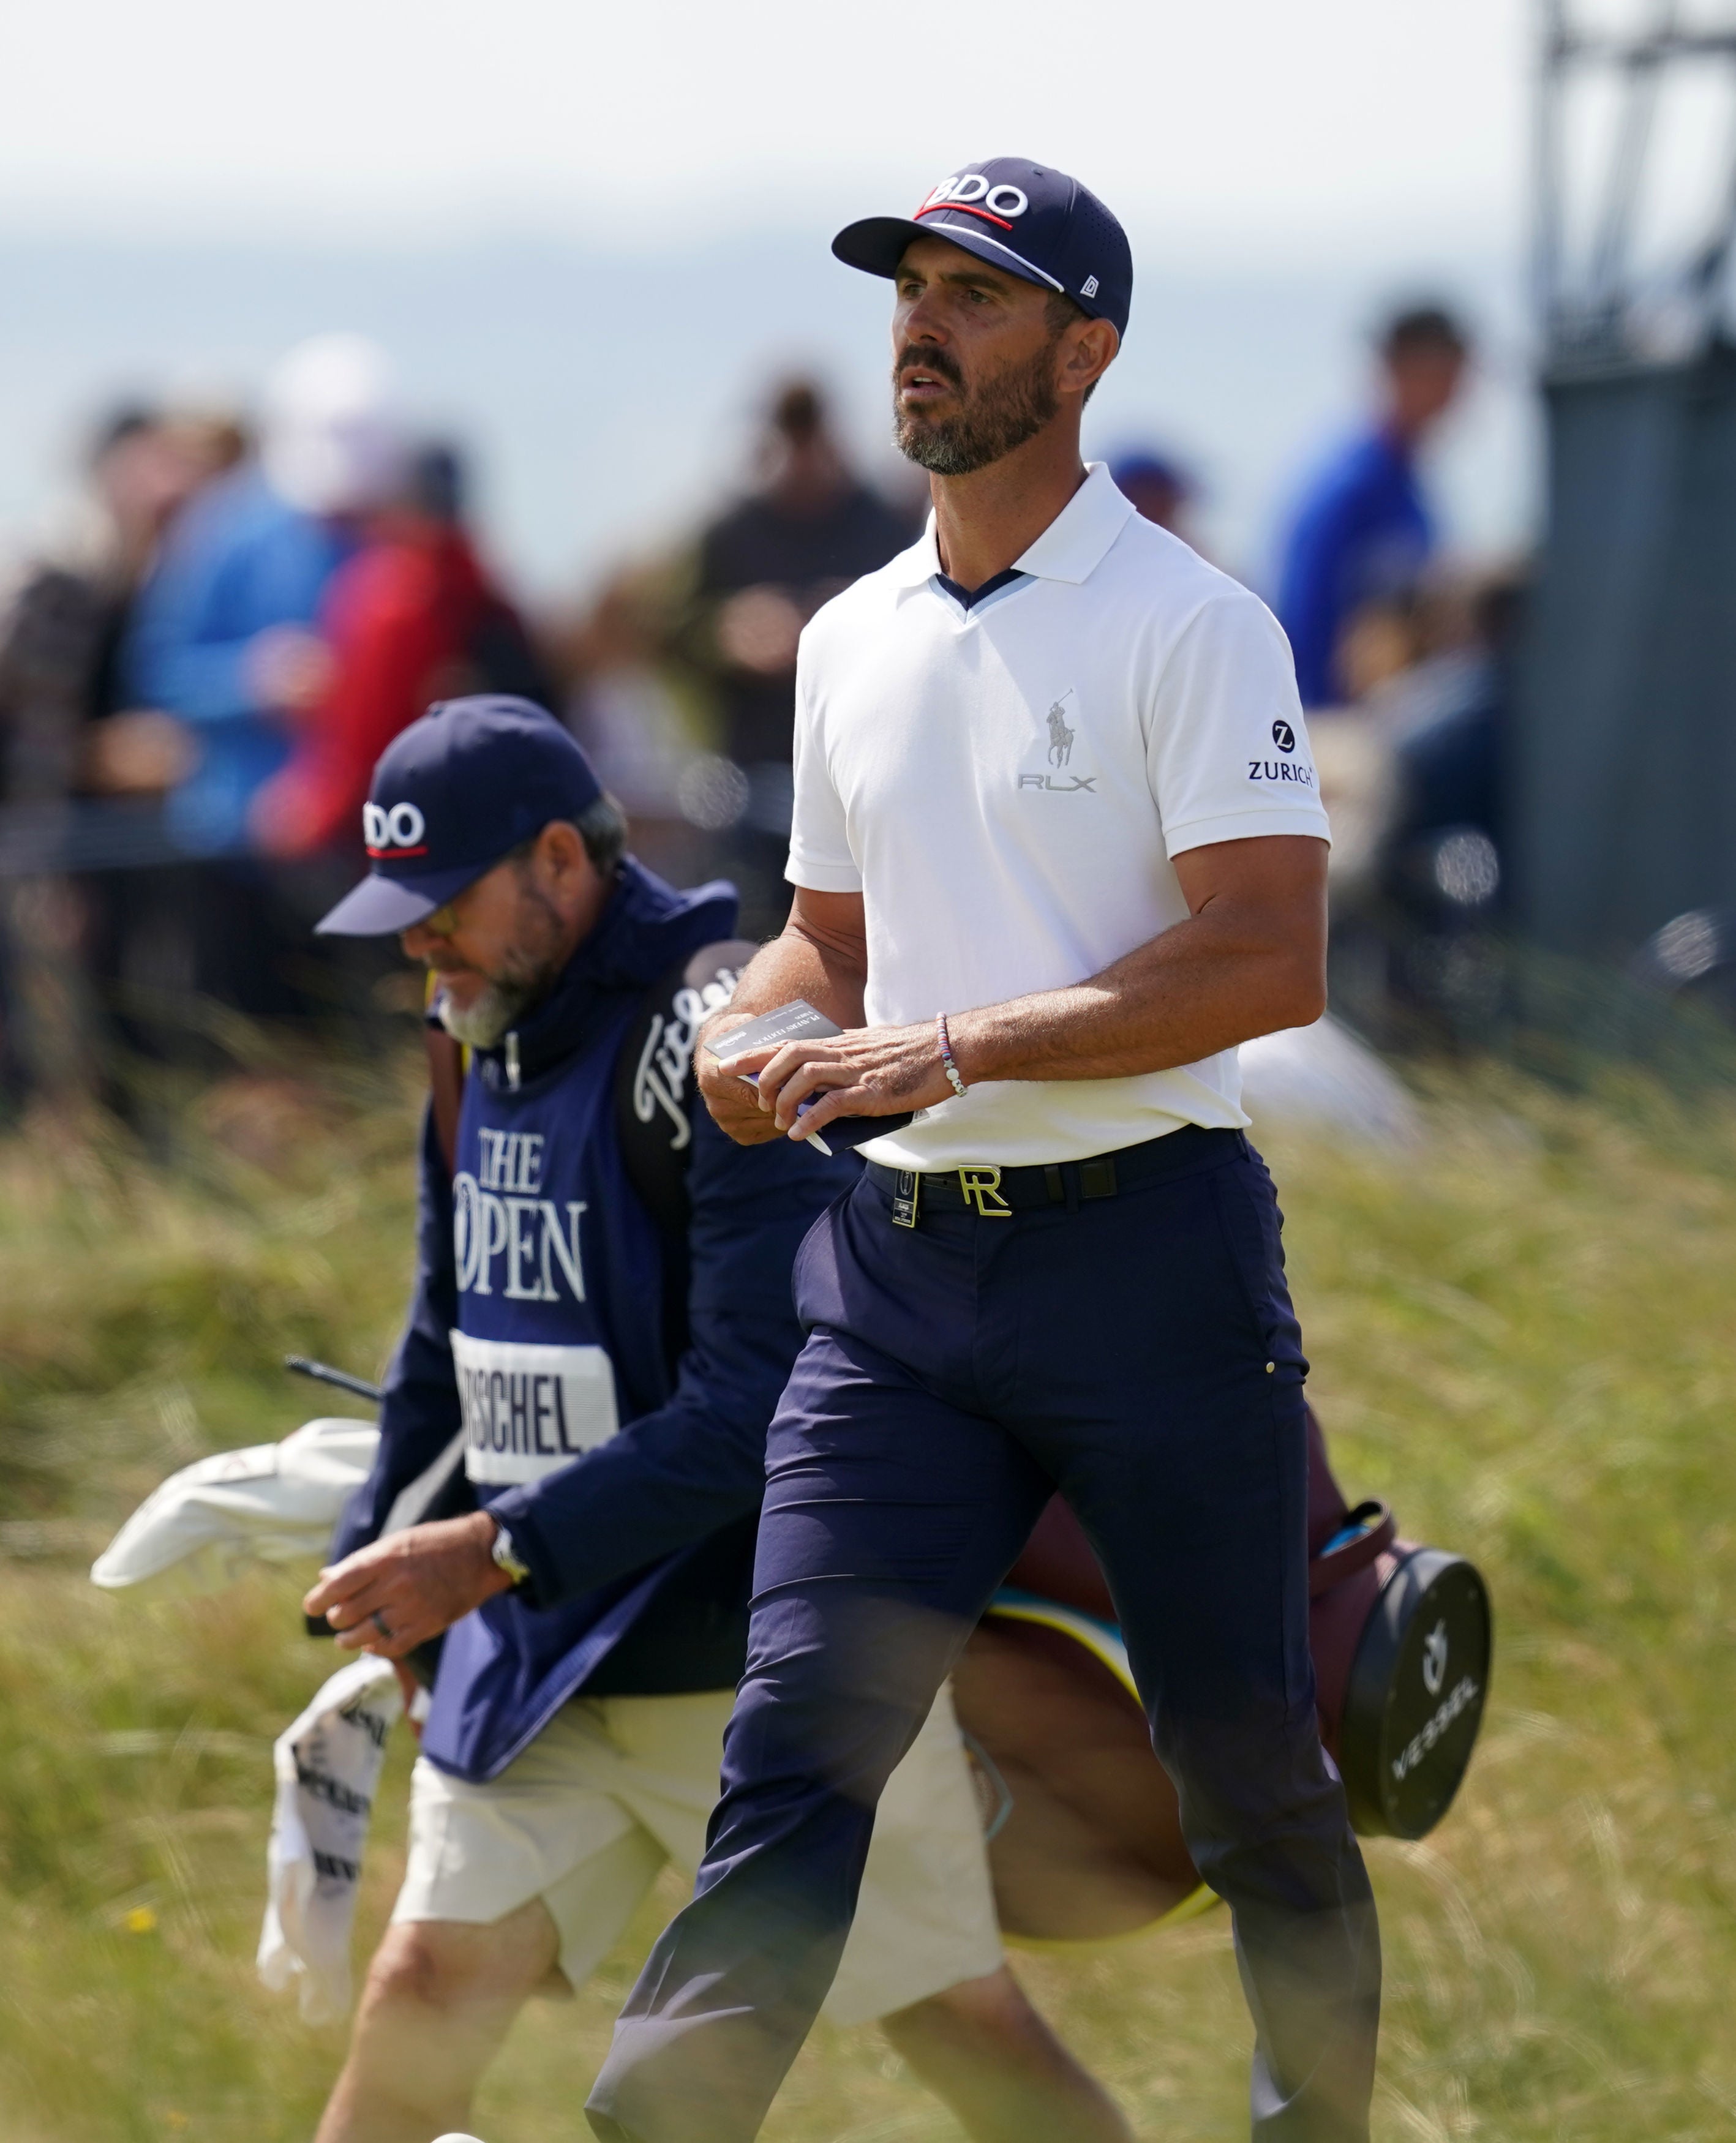 Billy Horschel helped hand over a protester to the police